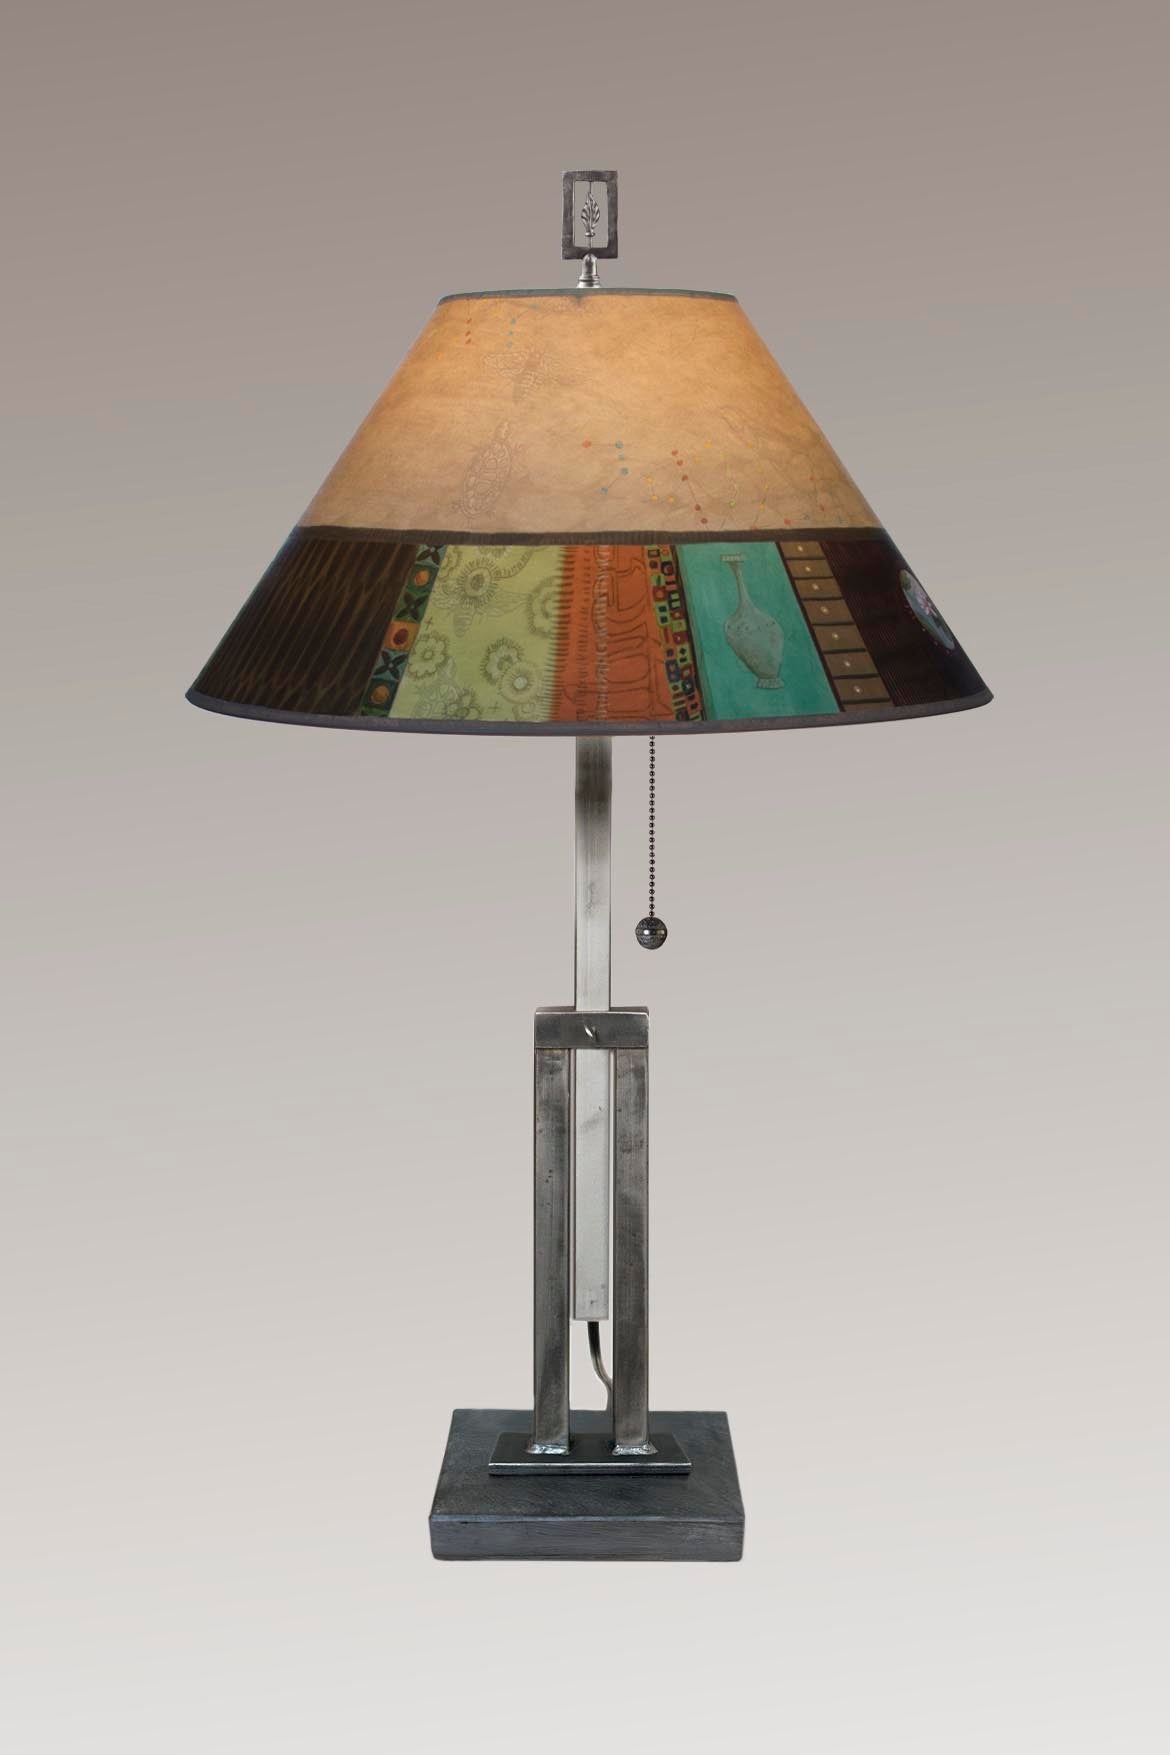 Janna Ugone &amp; Co Table Lamp Adjustable-Height Steel Table Lamp with Large Drum Shade in Linen Match